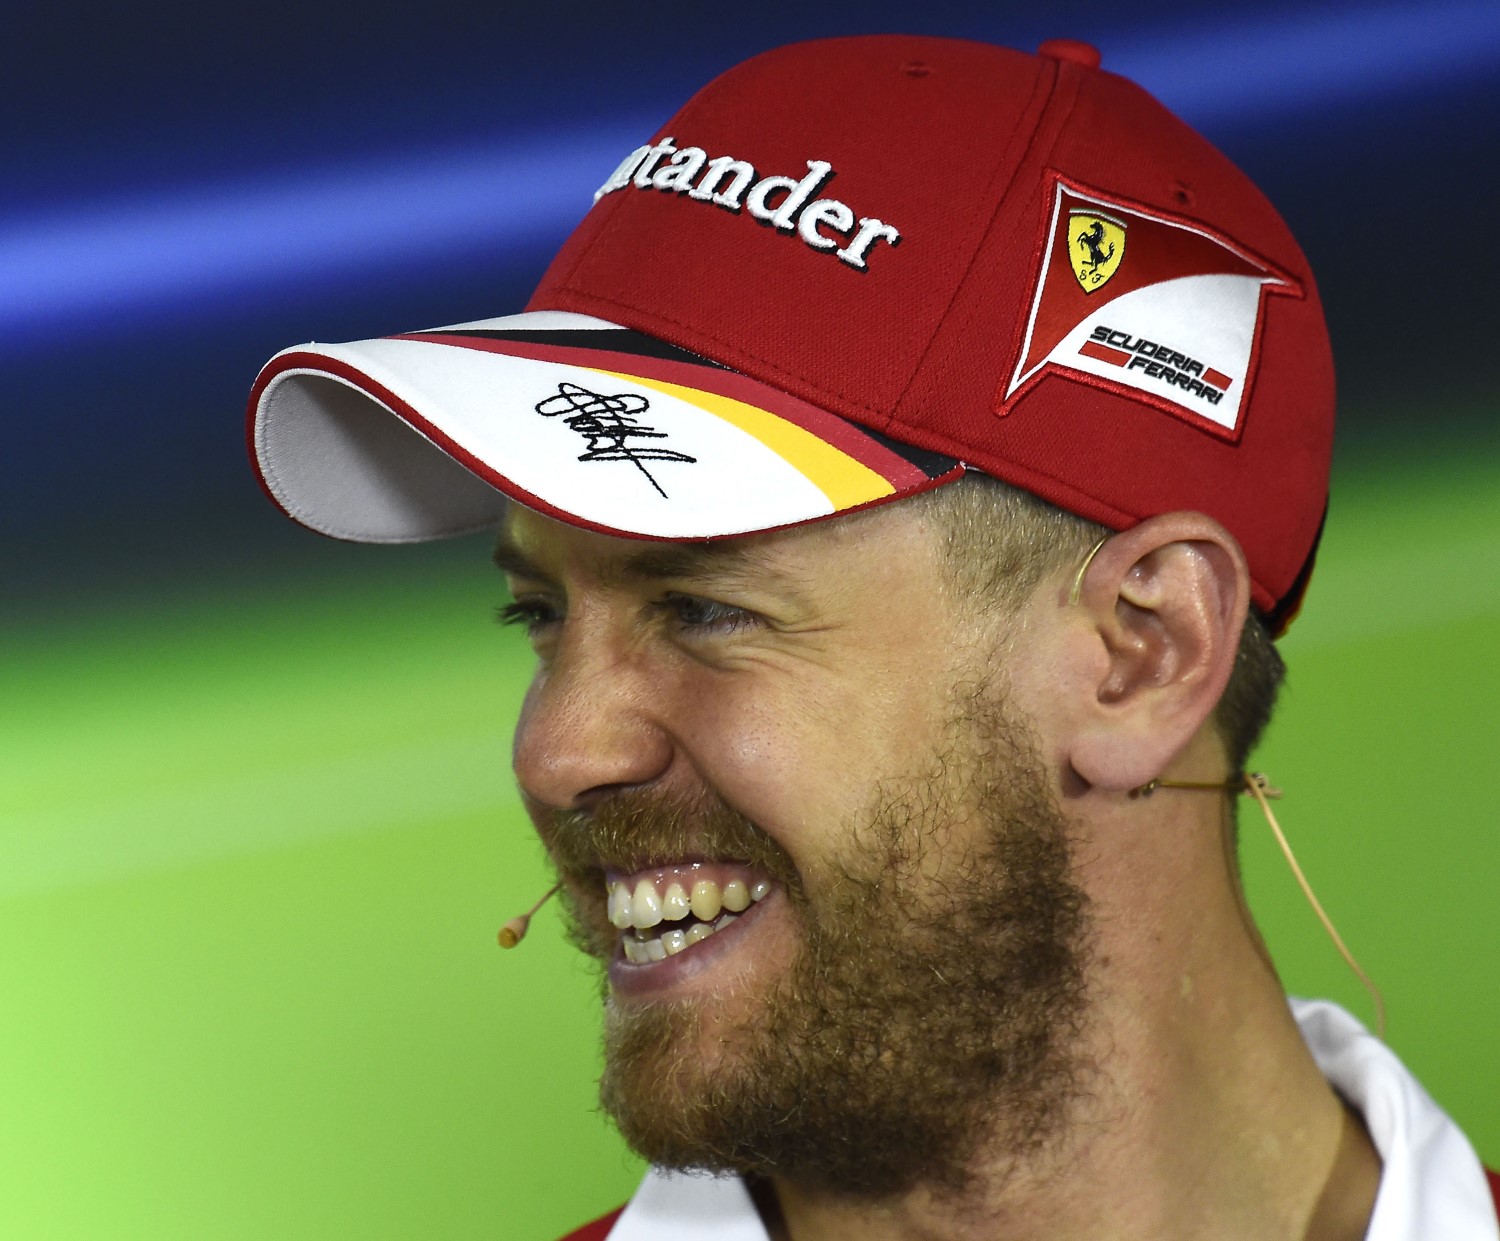 Vettel reacts when he hears the news of the banned suspensions